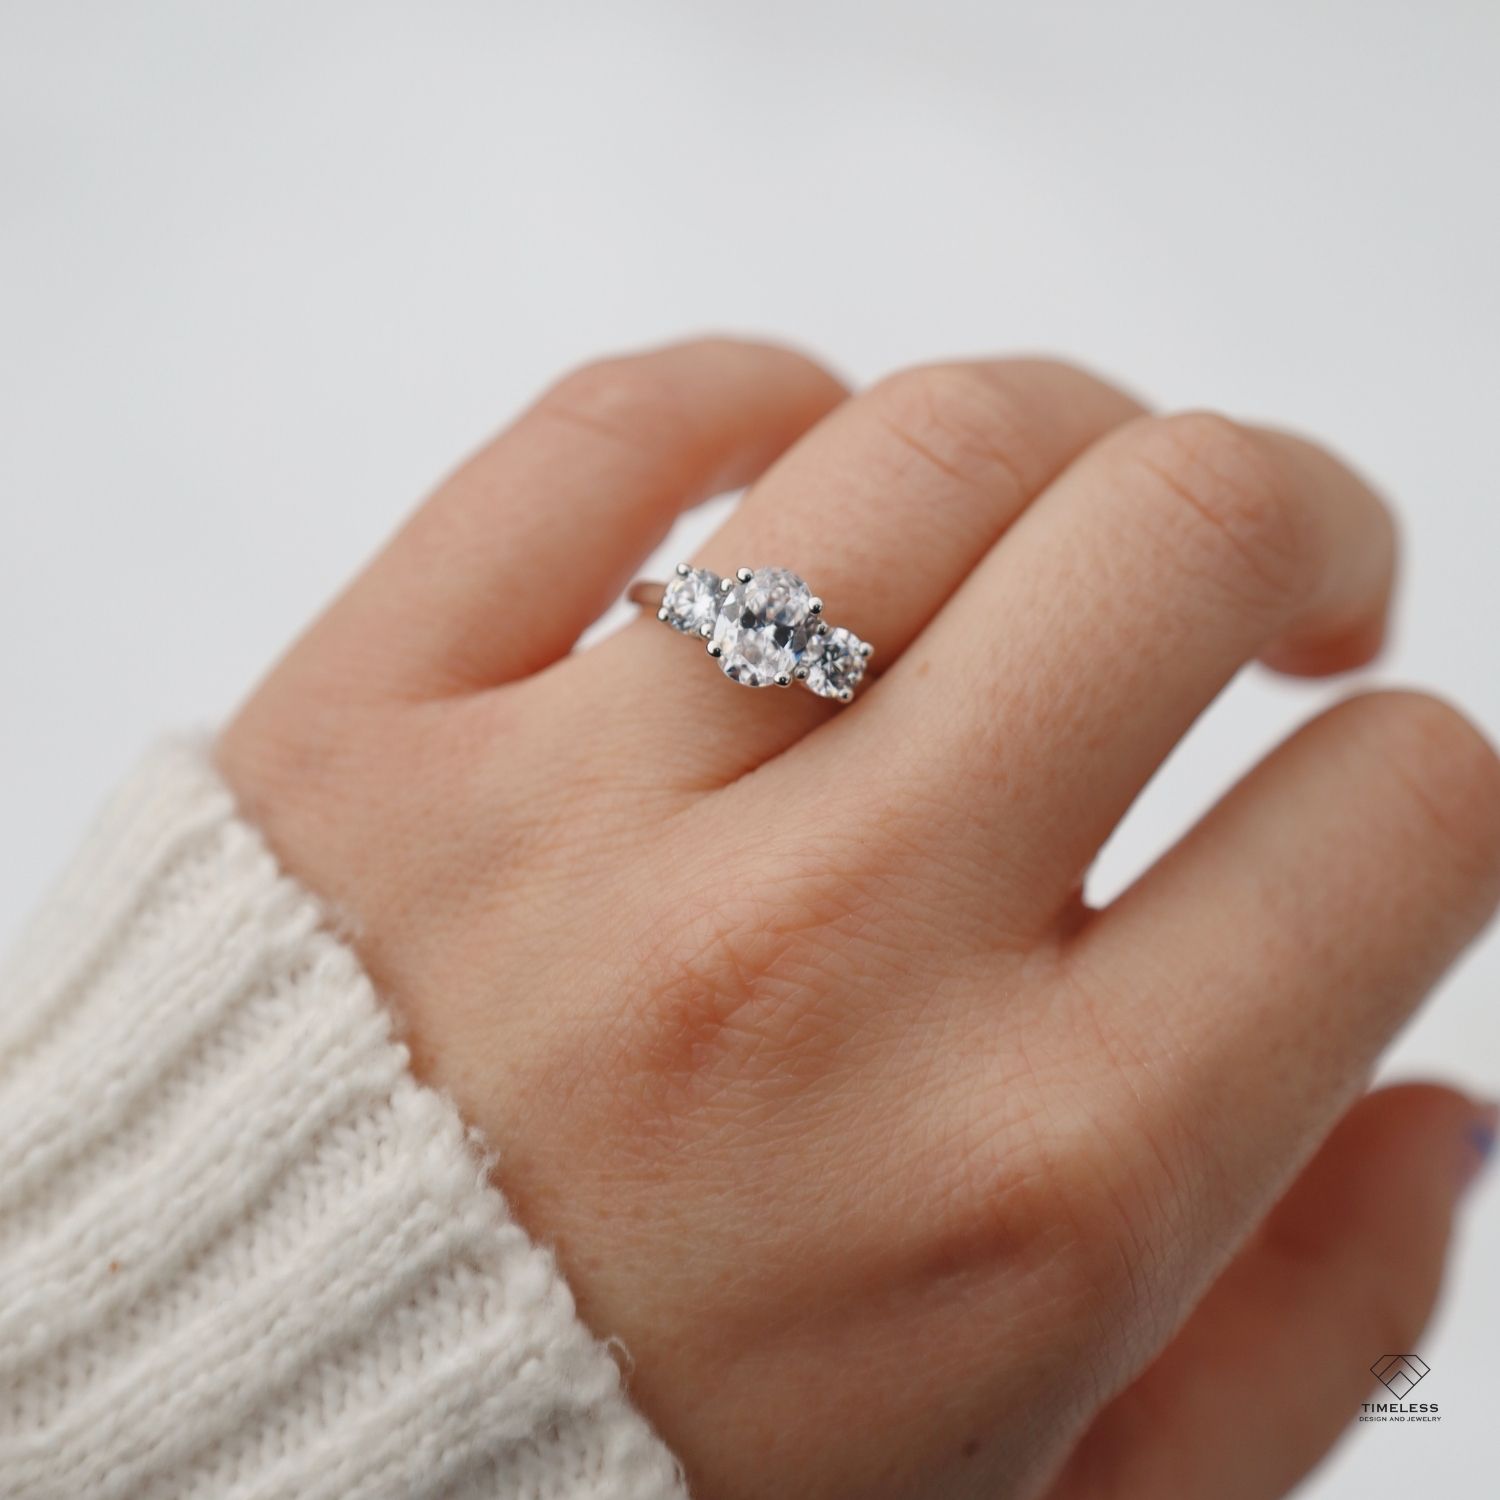 Custom Engagement Rings in Salt Lake City by Timeless Design and Jewelry